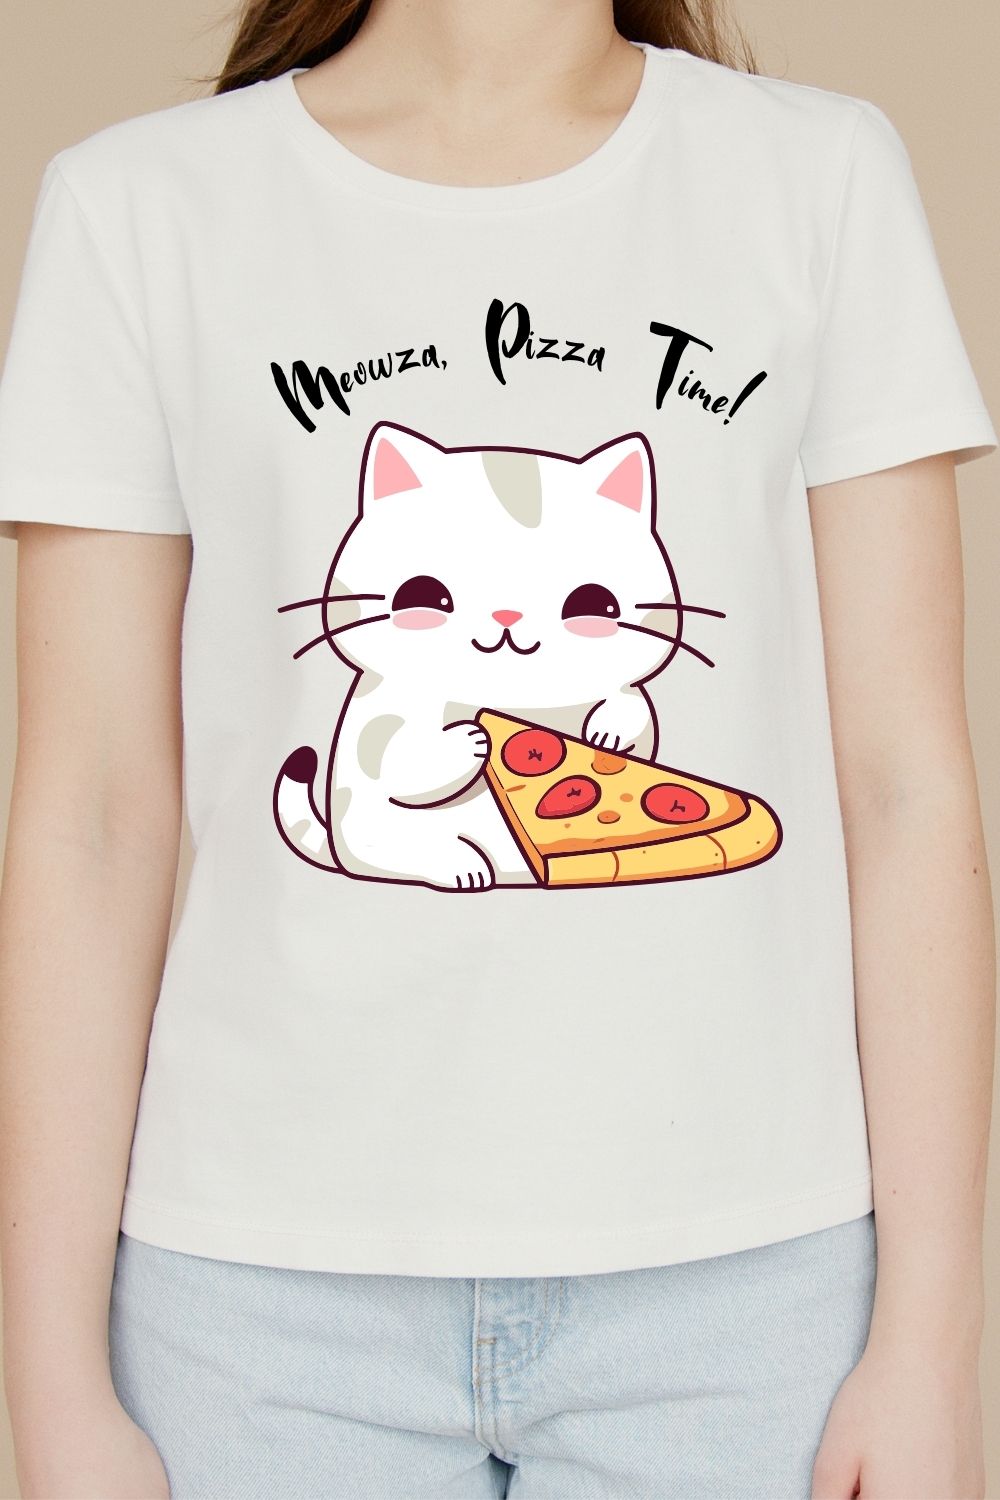 Meowza, Pizza Time! T-Shirt Design pinterest preview image.